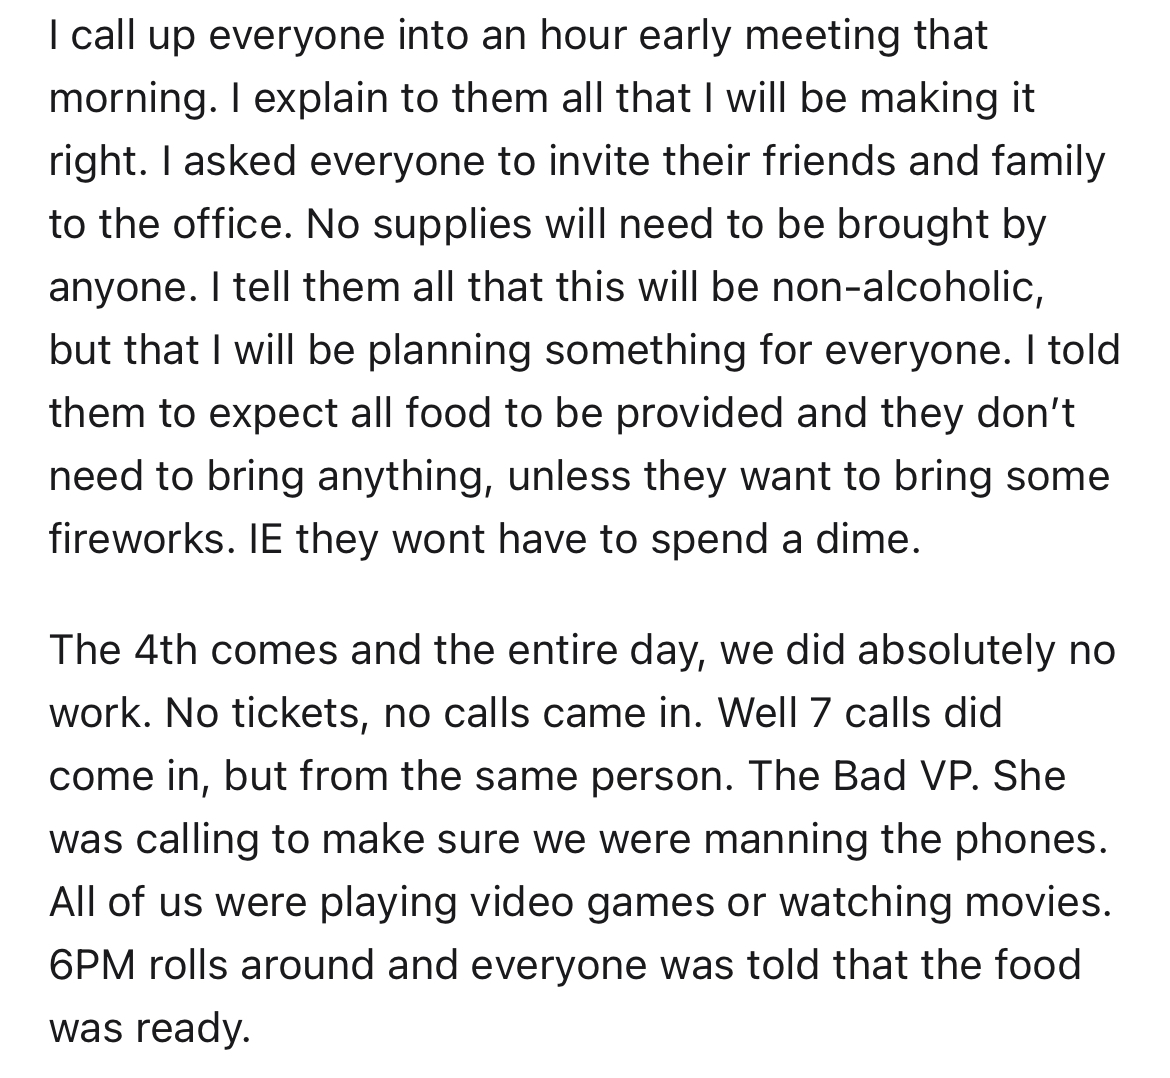 employees throw $6k 4th of July party at work -biden grief quote - I call up everyone into an hour early meeting that morning. I explain to them all that I will be making it right. I asked everyone to invite their friends and family to the office. No supp